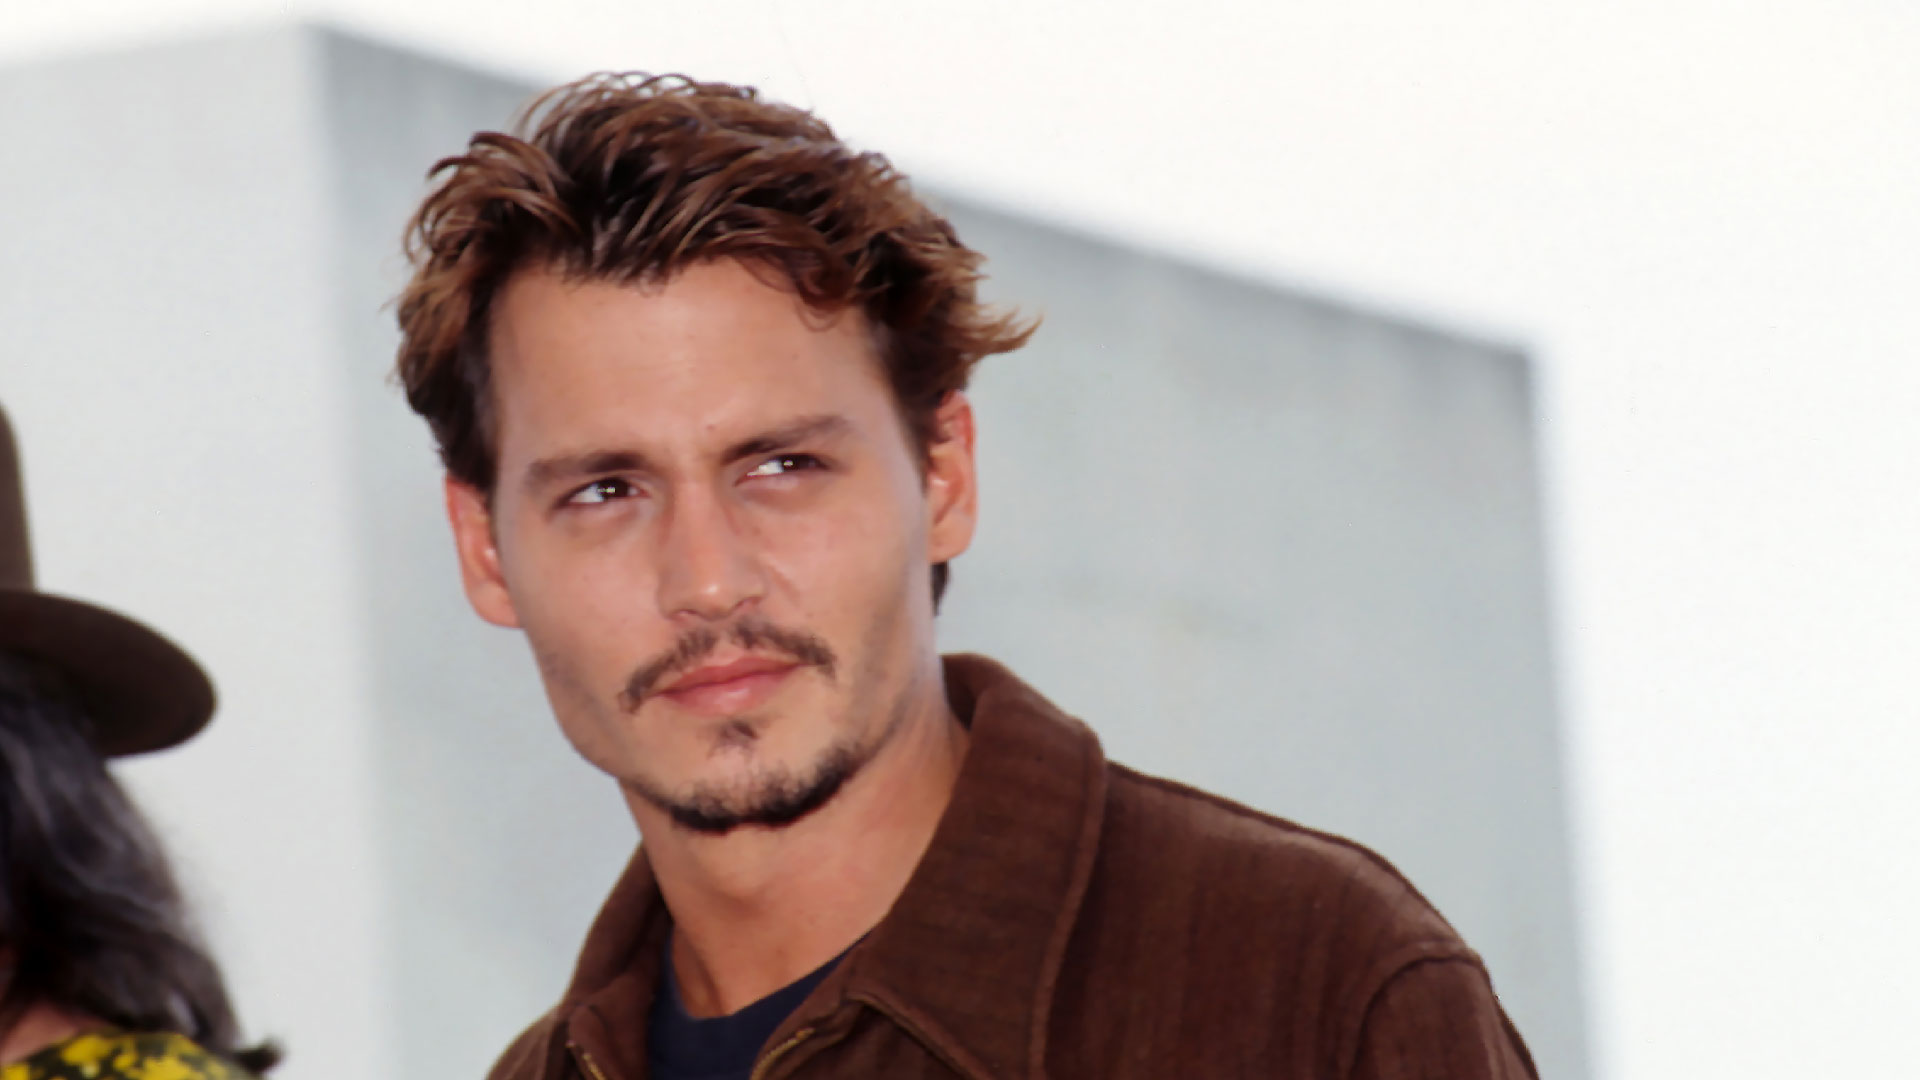 Johnny Depp: “I'd star in a film with Vanessa Paradis” - Celebrity News |  Glamour UK